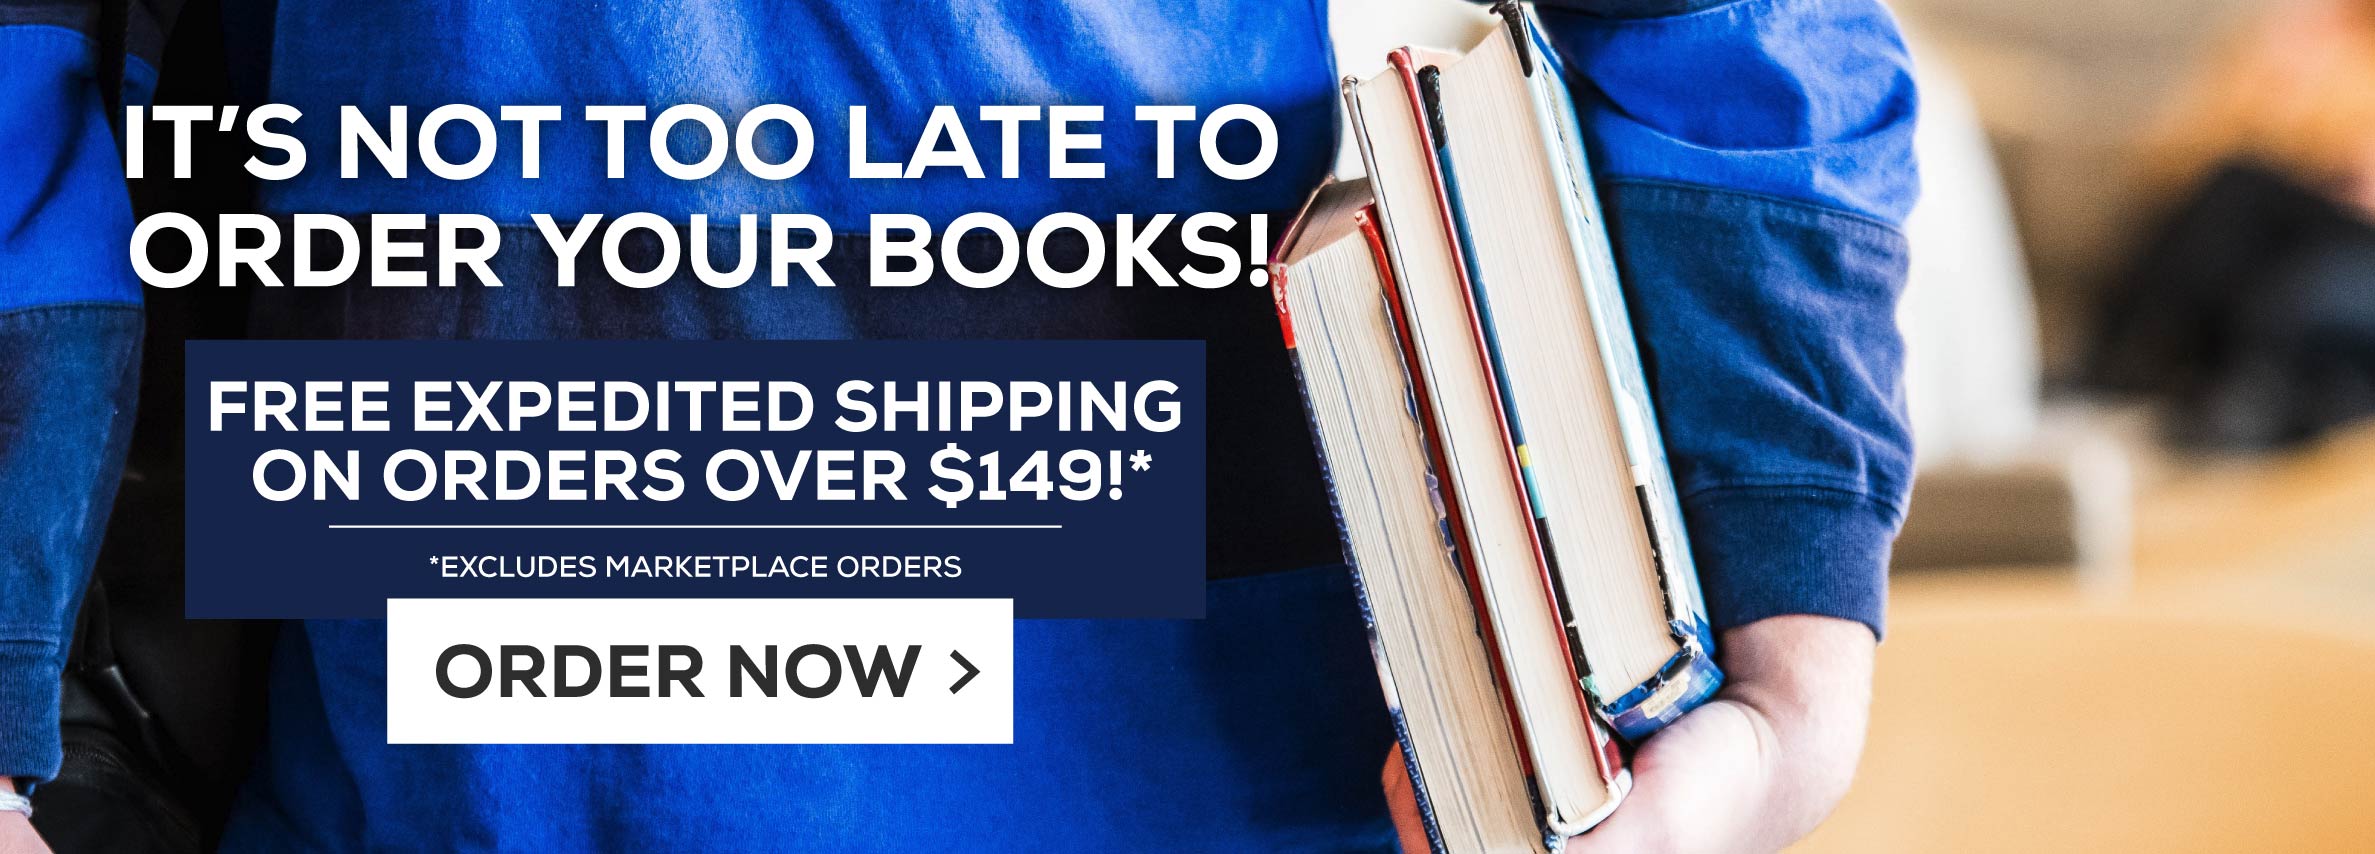 It's Not Too Late to Order Your Books! - Free expedited shipping on orders over $149!* - Excludes Marketplace Orders - Order Now